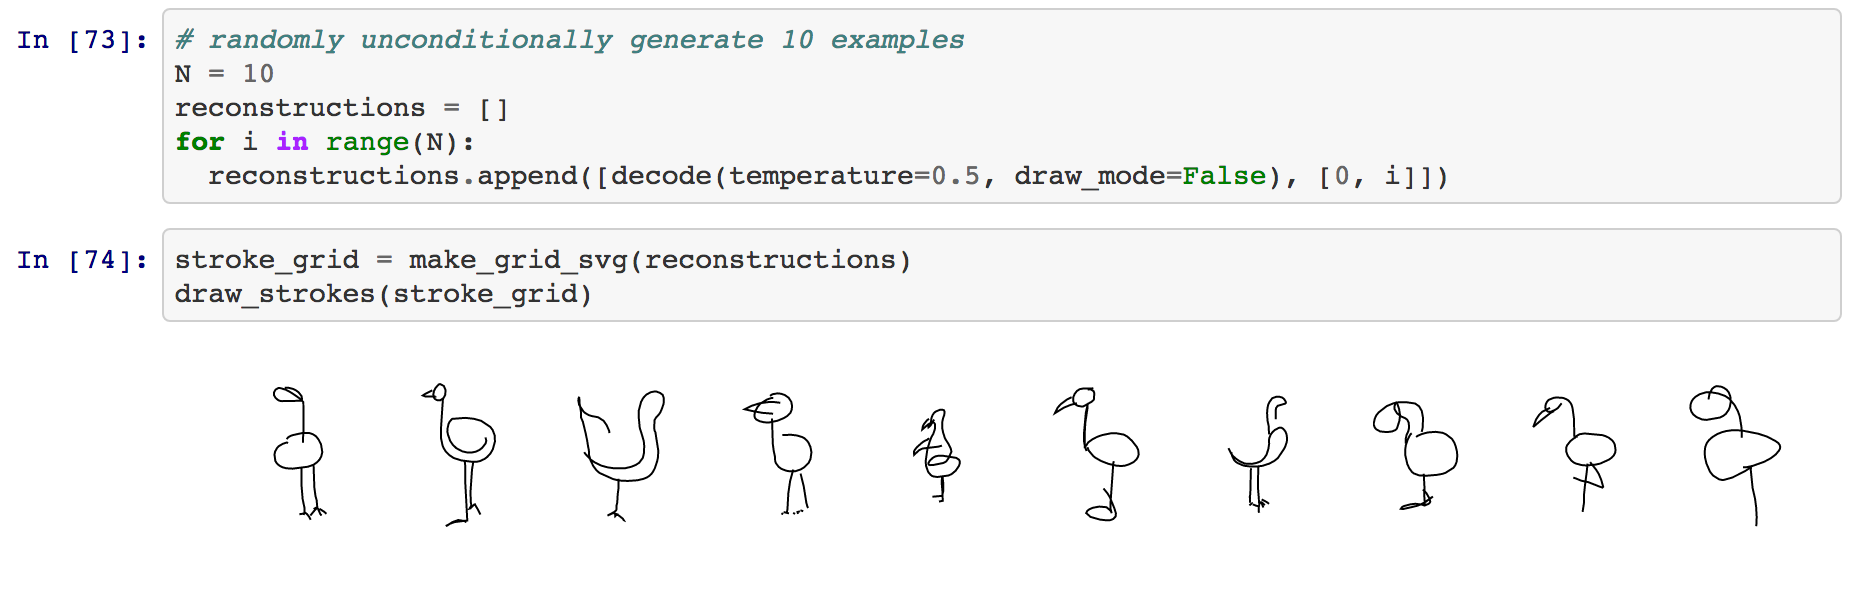 Some generated flamingos from the Jupyter notebook